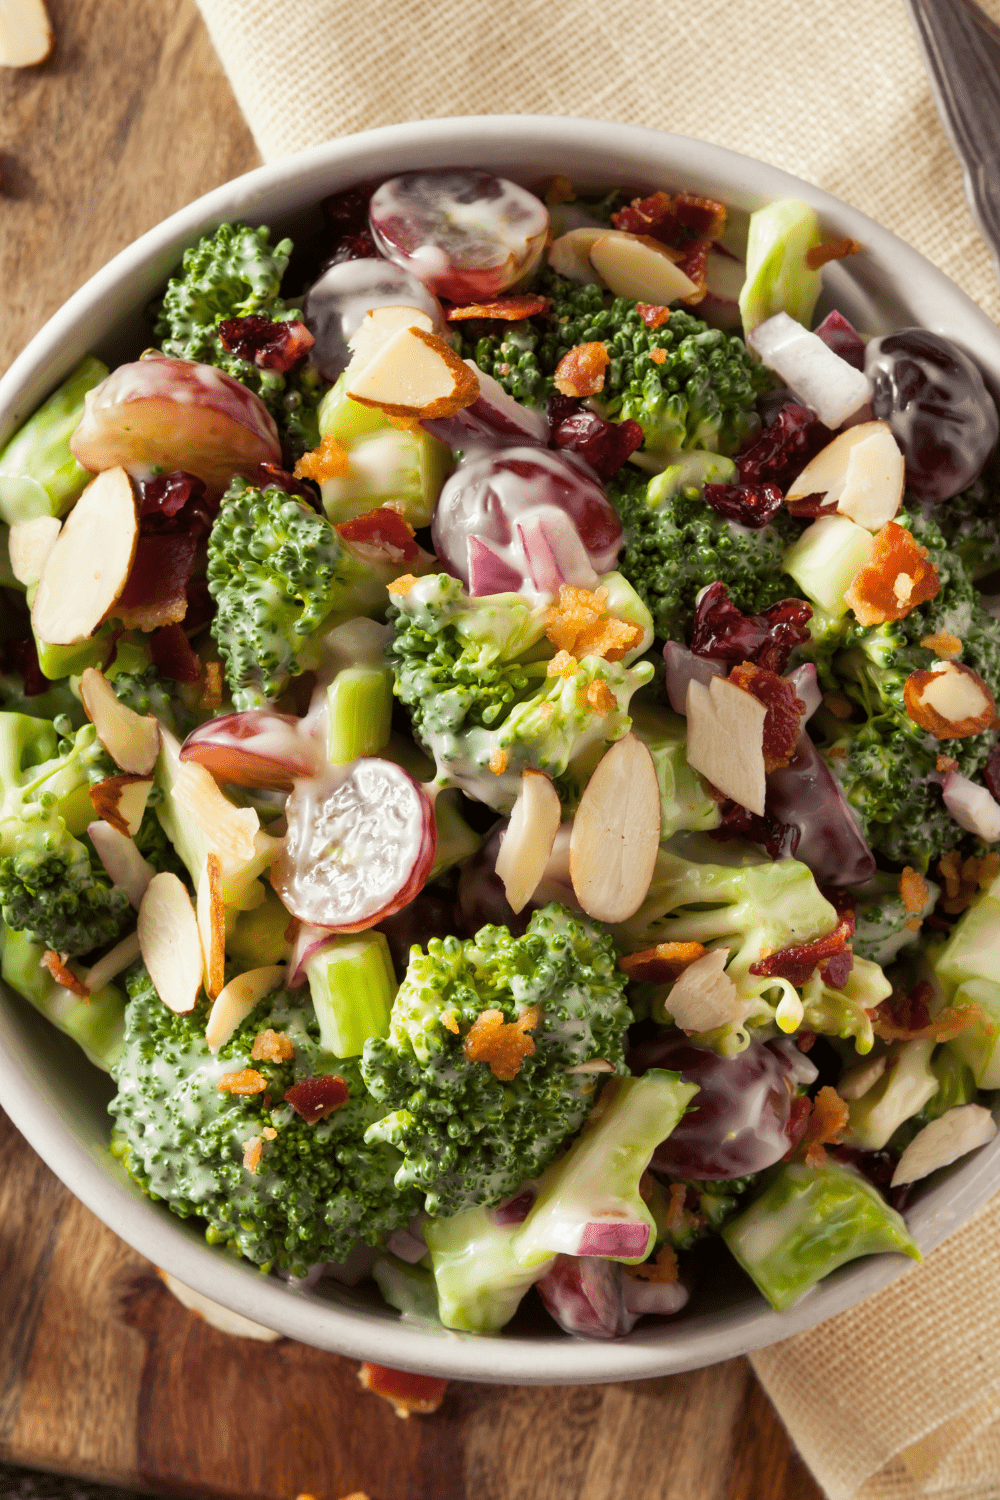 Creamy Broccoli Salad with Grapes and Bits of Bacon